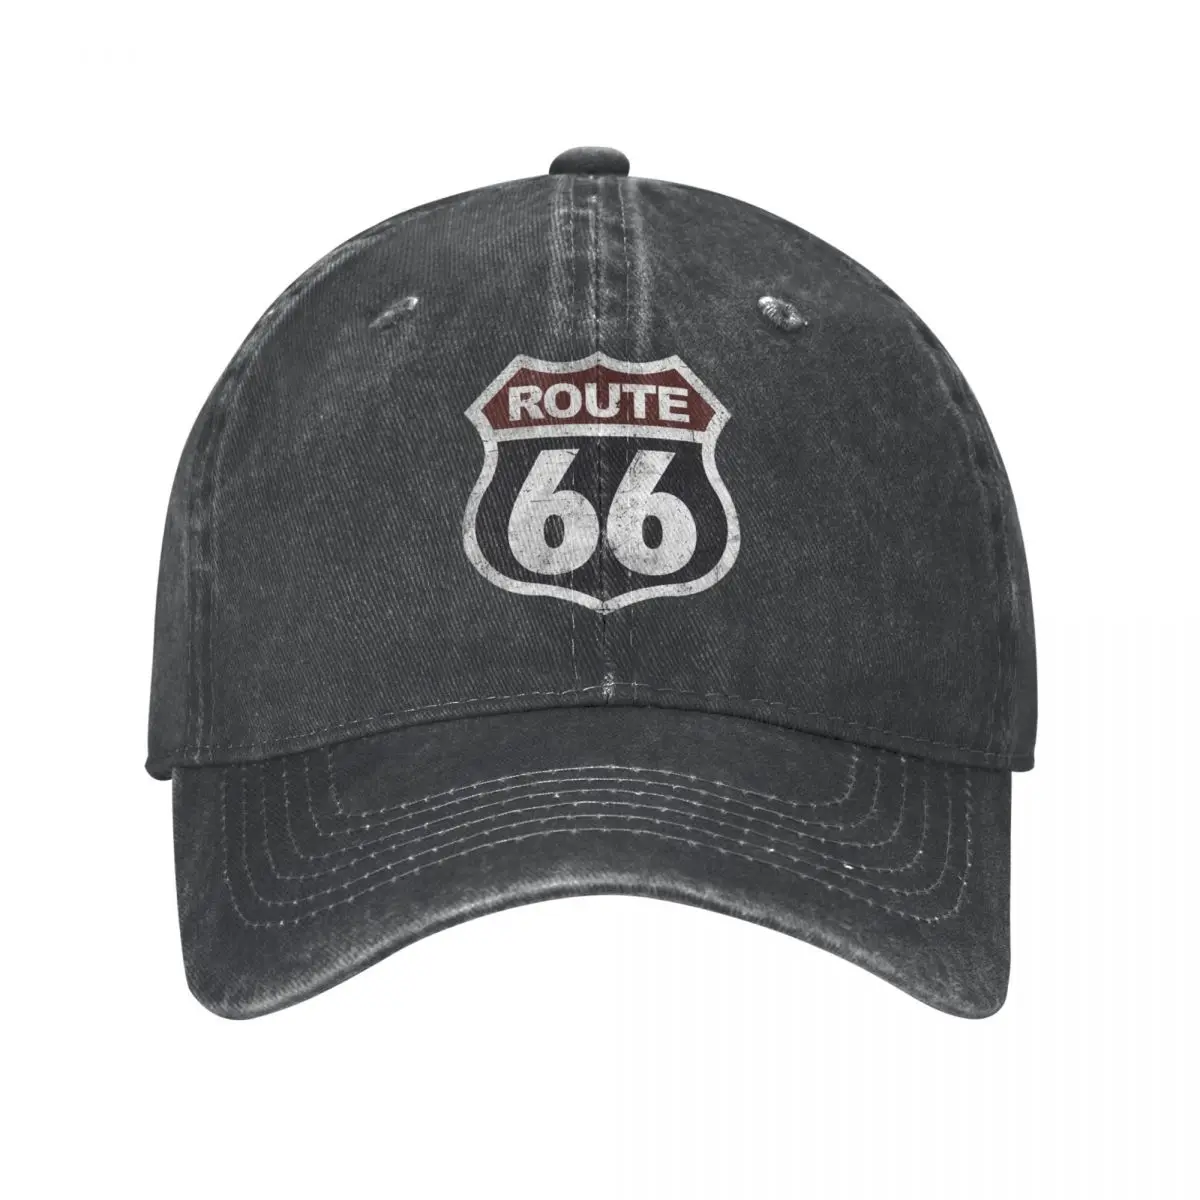 

Historic Route 66 Mother Road Vintage Baseball Caps Vintage Distressed Washed Sun Cap for Men Women Outdoor Activities Caps Hat